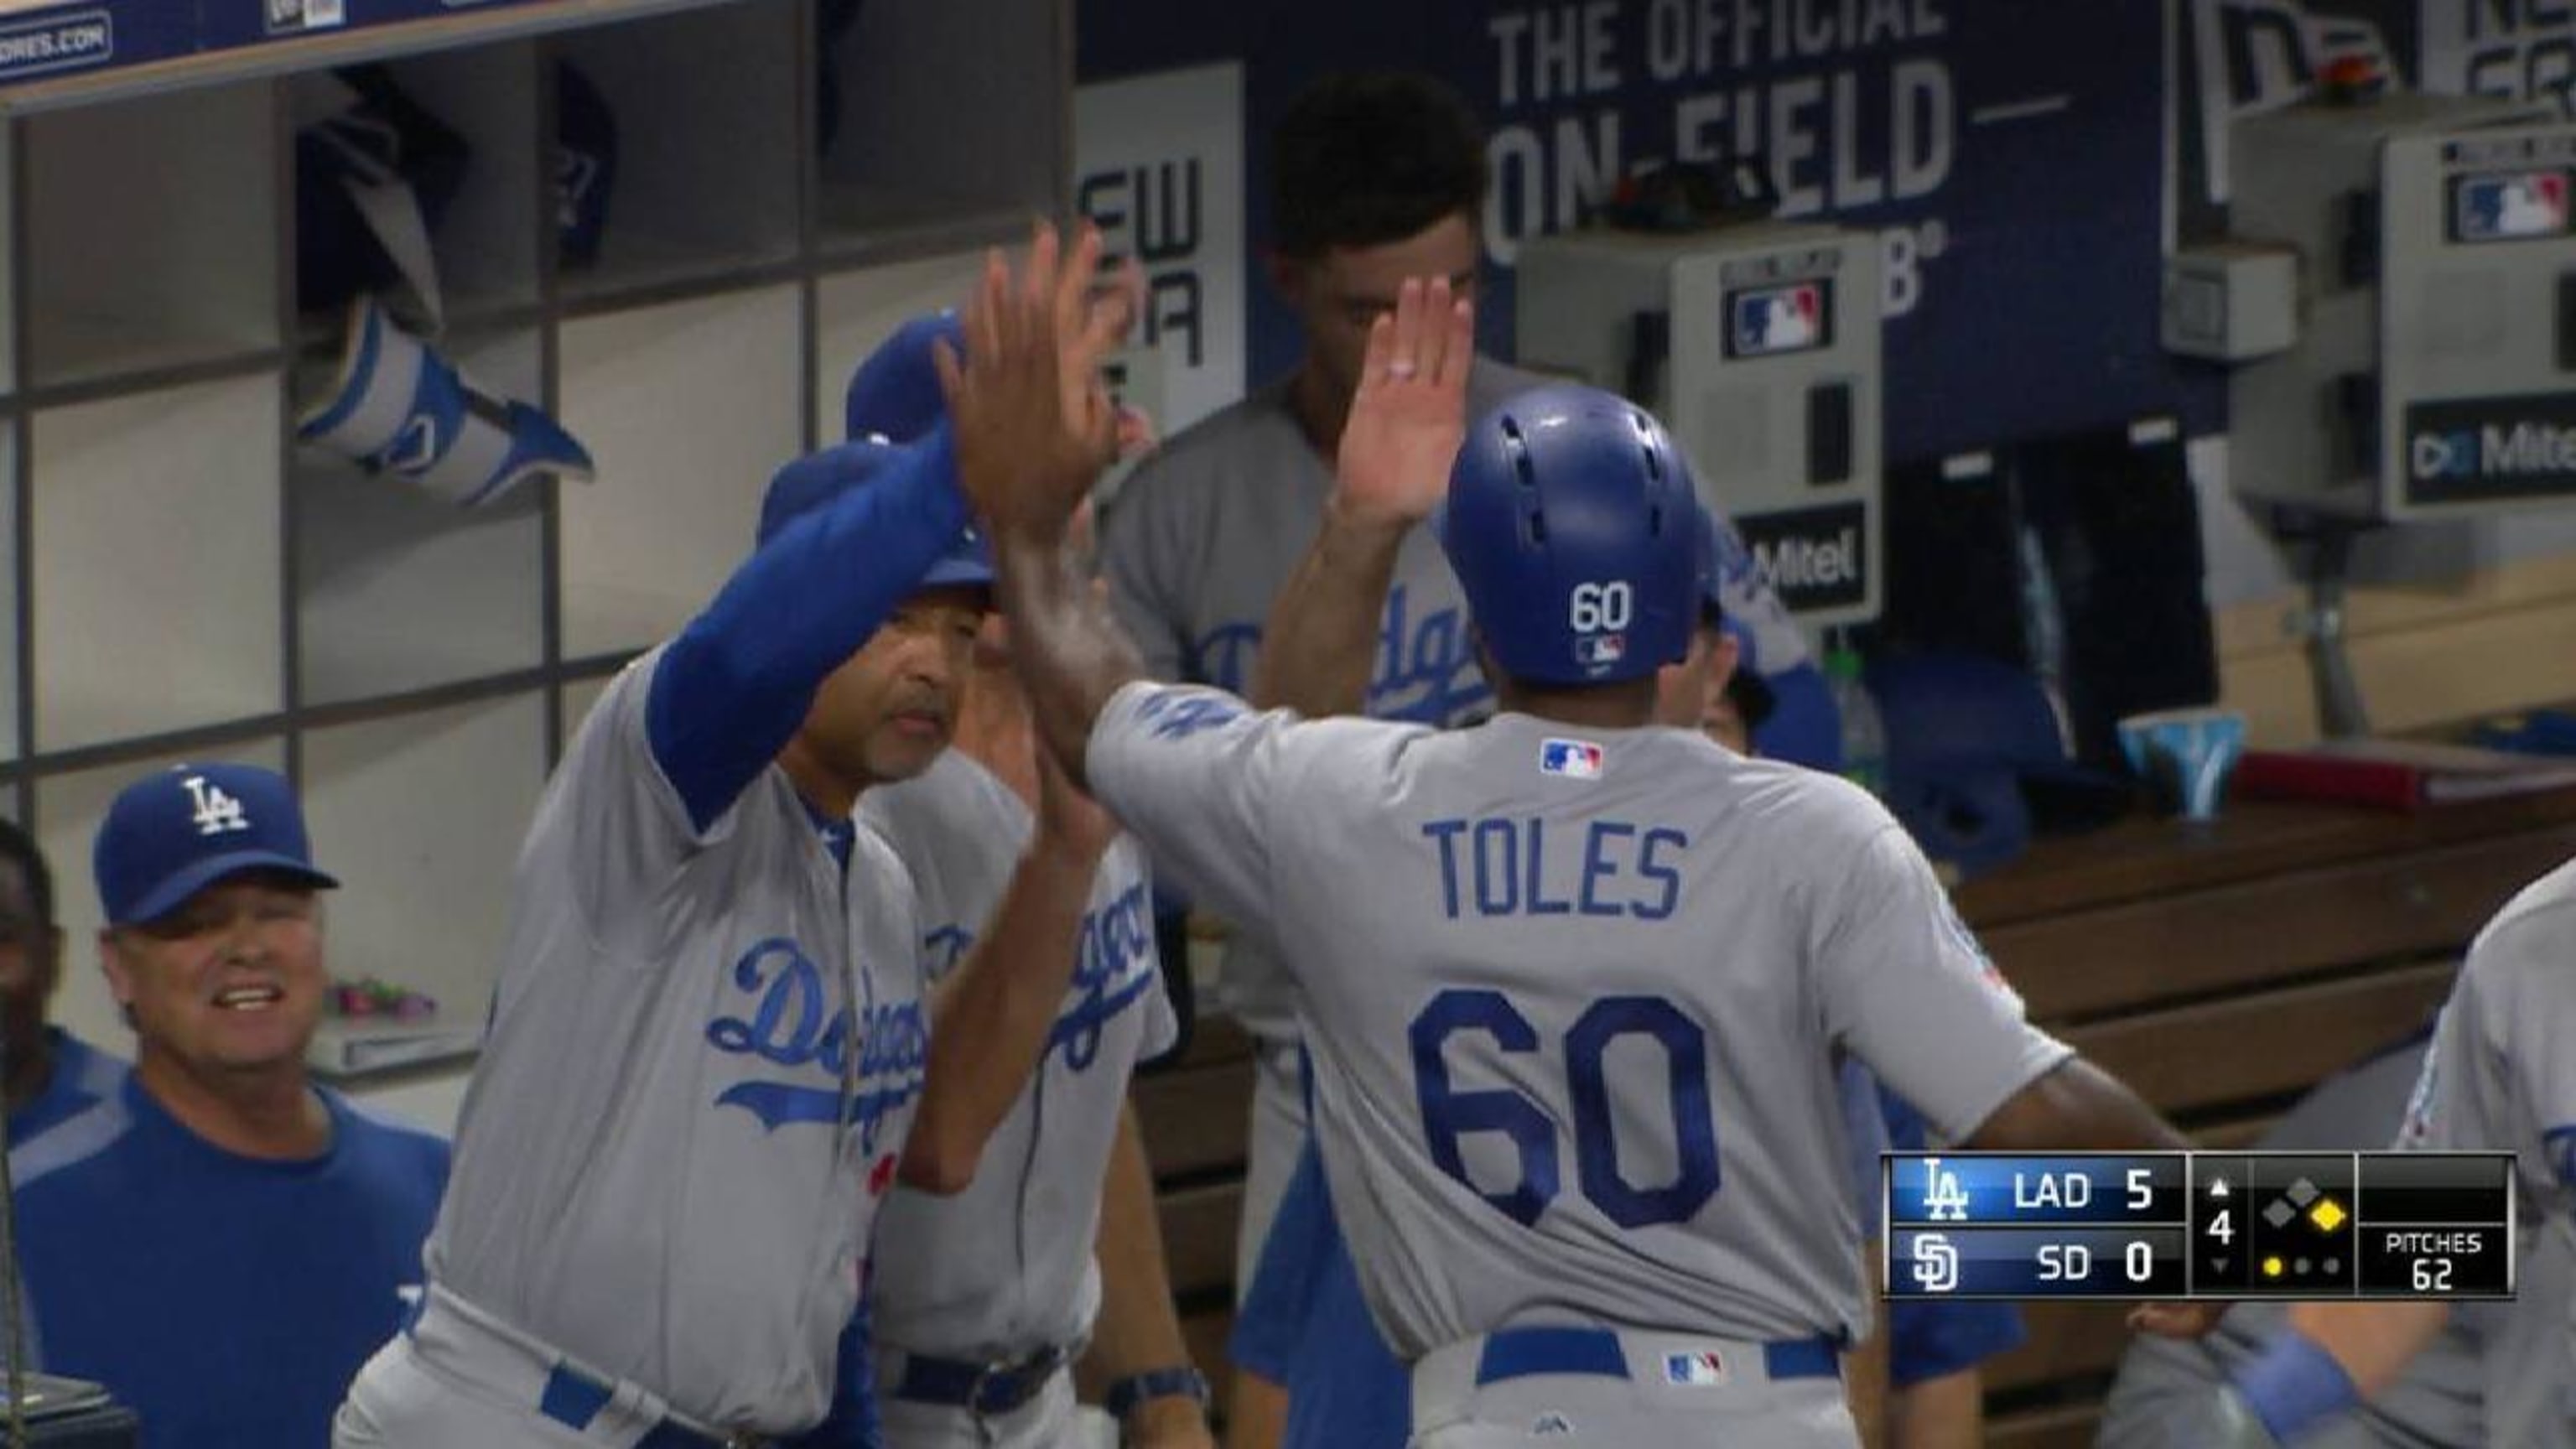 Andrew Toles replaces injured Yasiel Puig